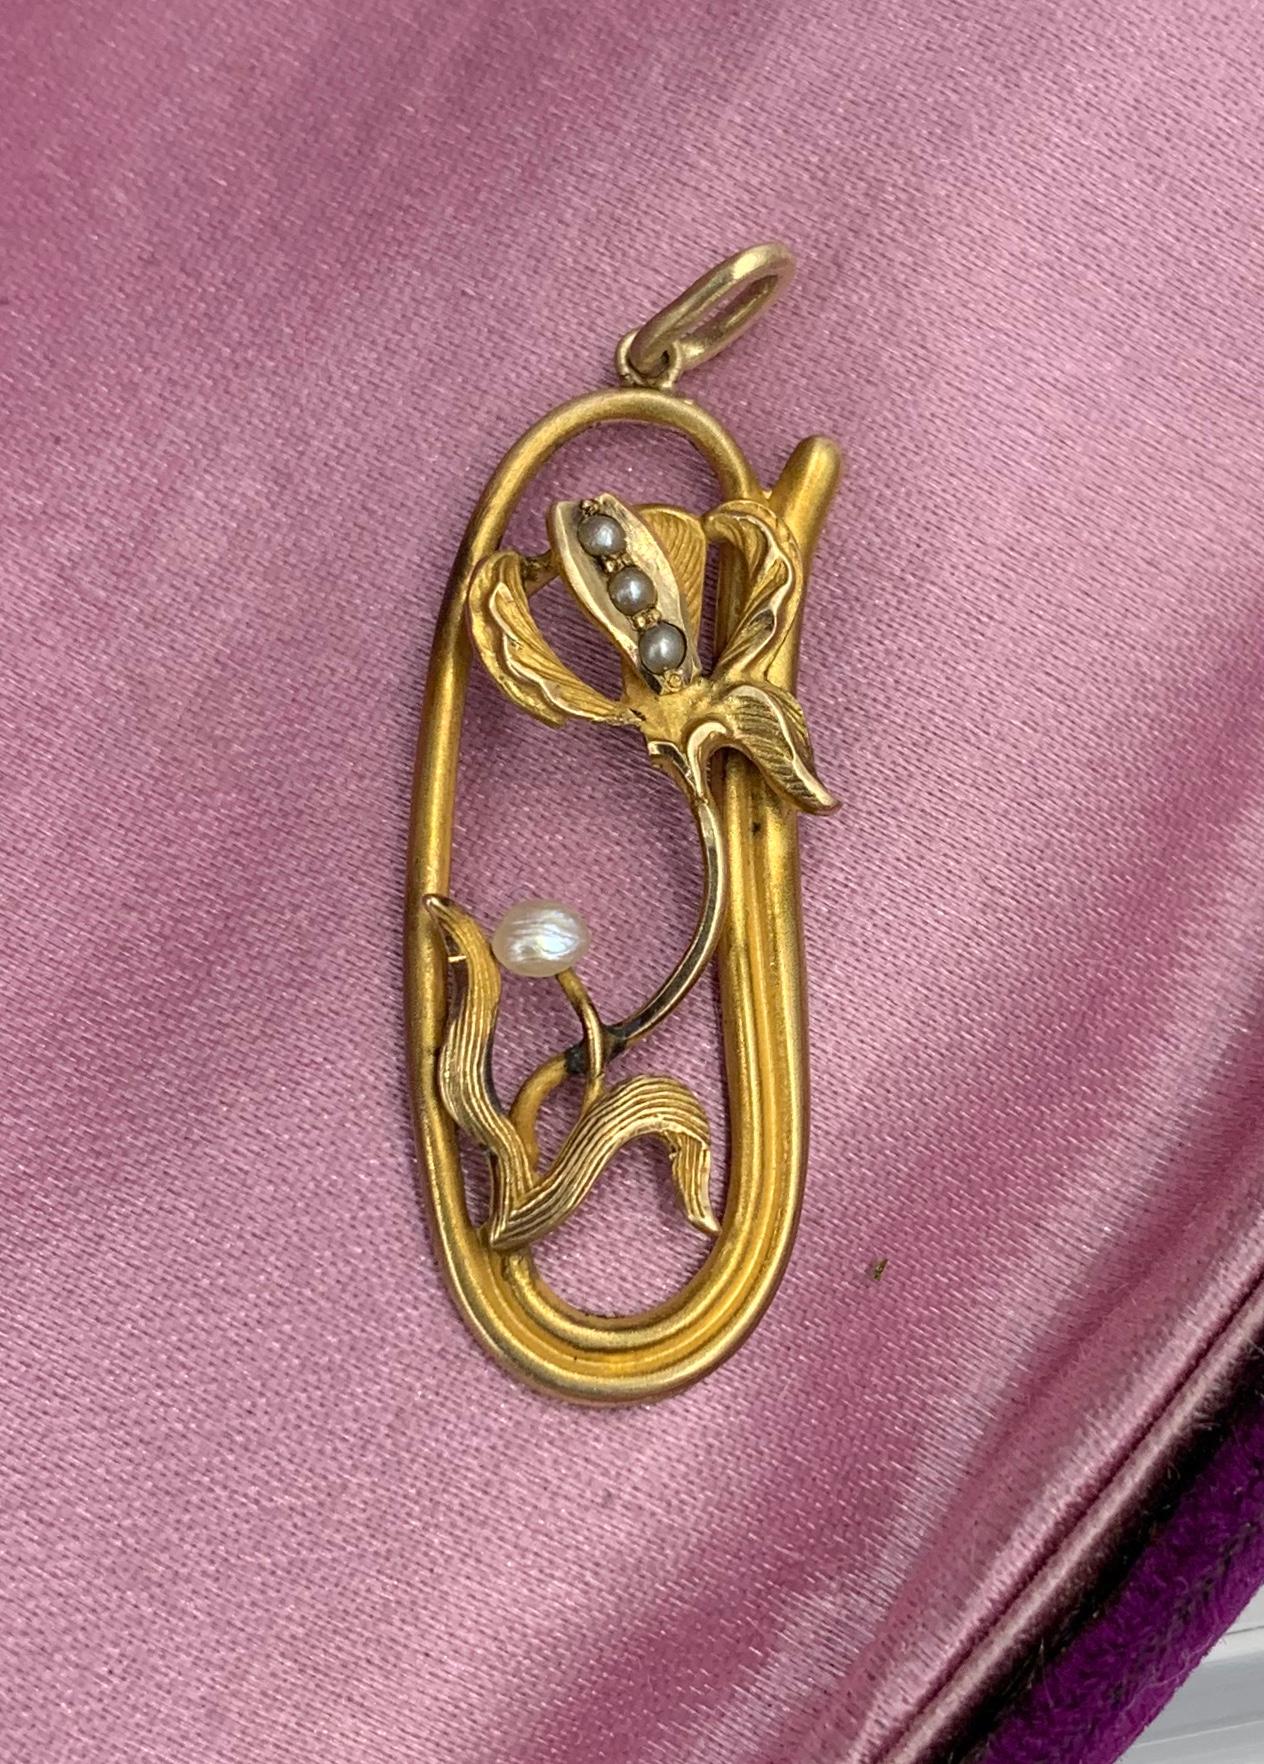 AN ART NOUVEAU PENDANT IN THE FORM OF AN IRIS FLOWER - SO STUNNING WITH THE MOST WONDERFUL THREE DIMENSIONAL DEPICTION OF THE IRIS FLOWER.   THE GOLD WORK IS OF THE HIGHEST QUALITY AND SET WITH SEED PEARL ACCENTS.  THE OPEN WORK DESIGN IS JUST